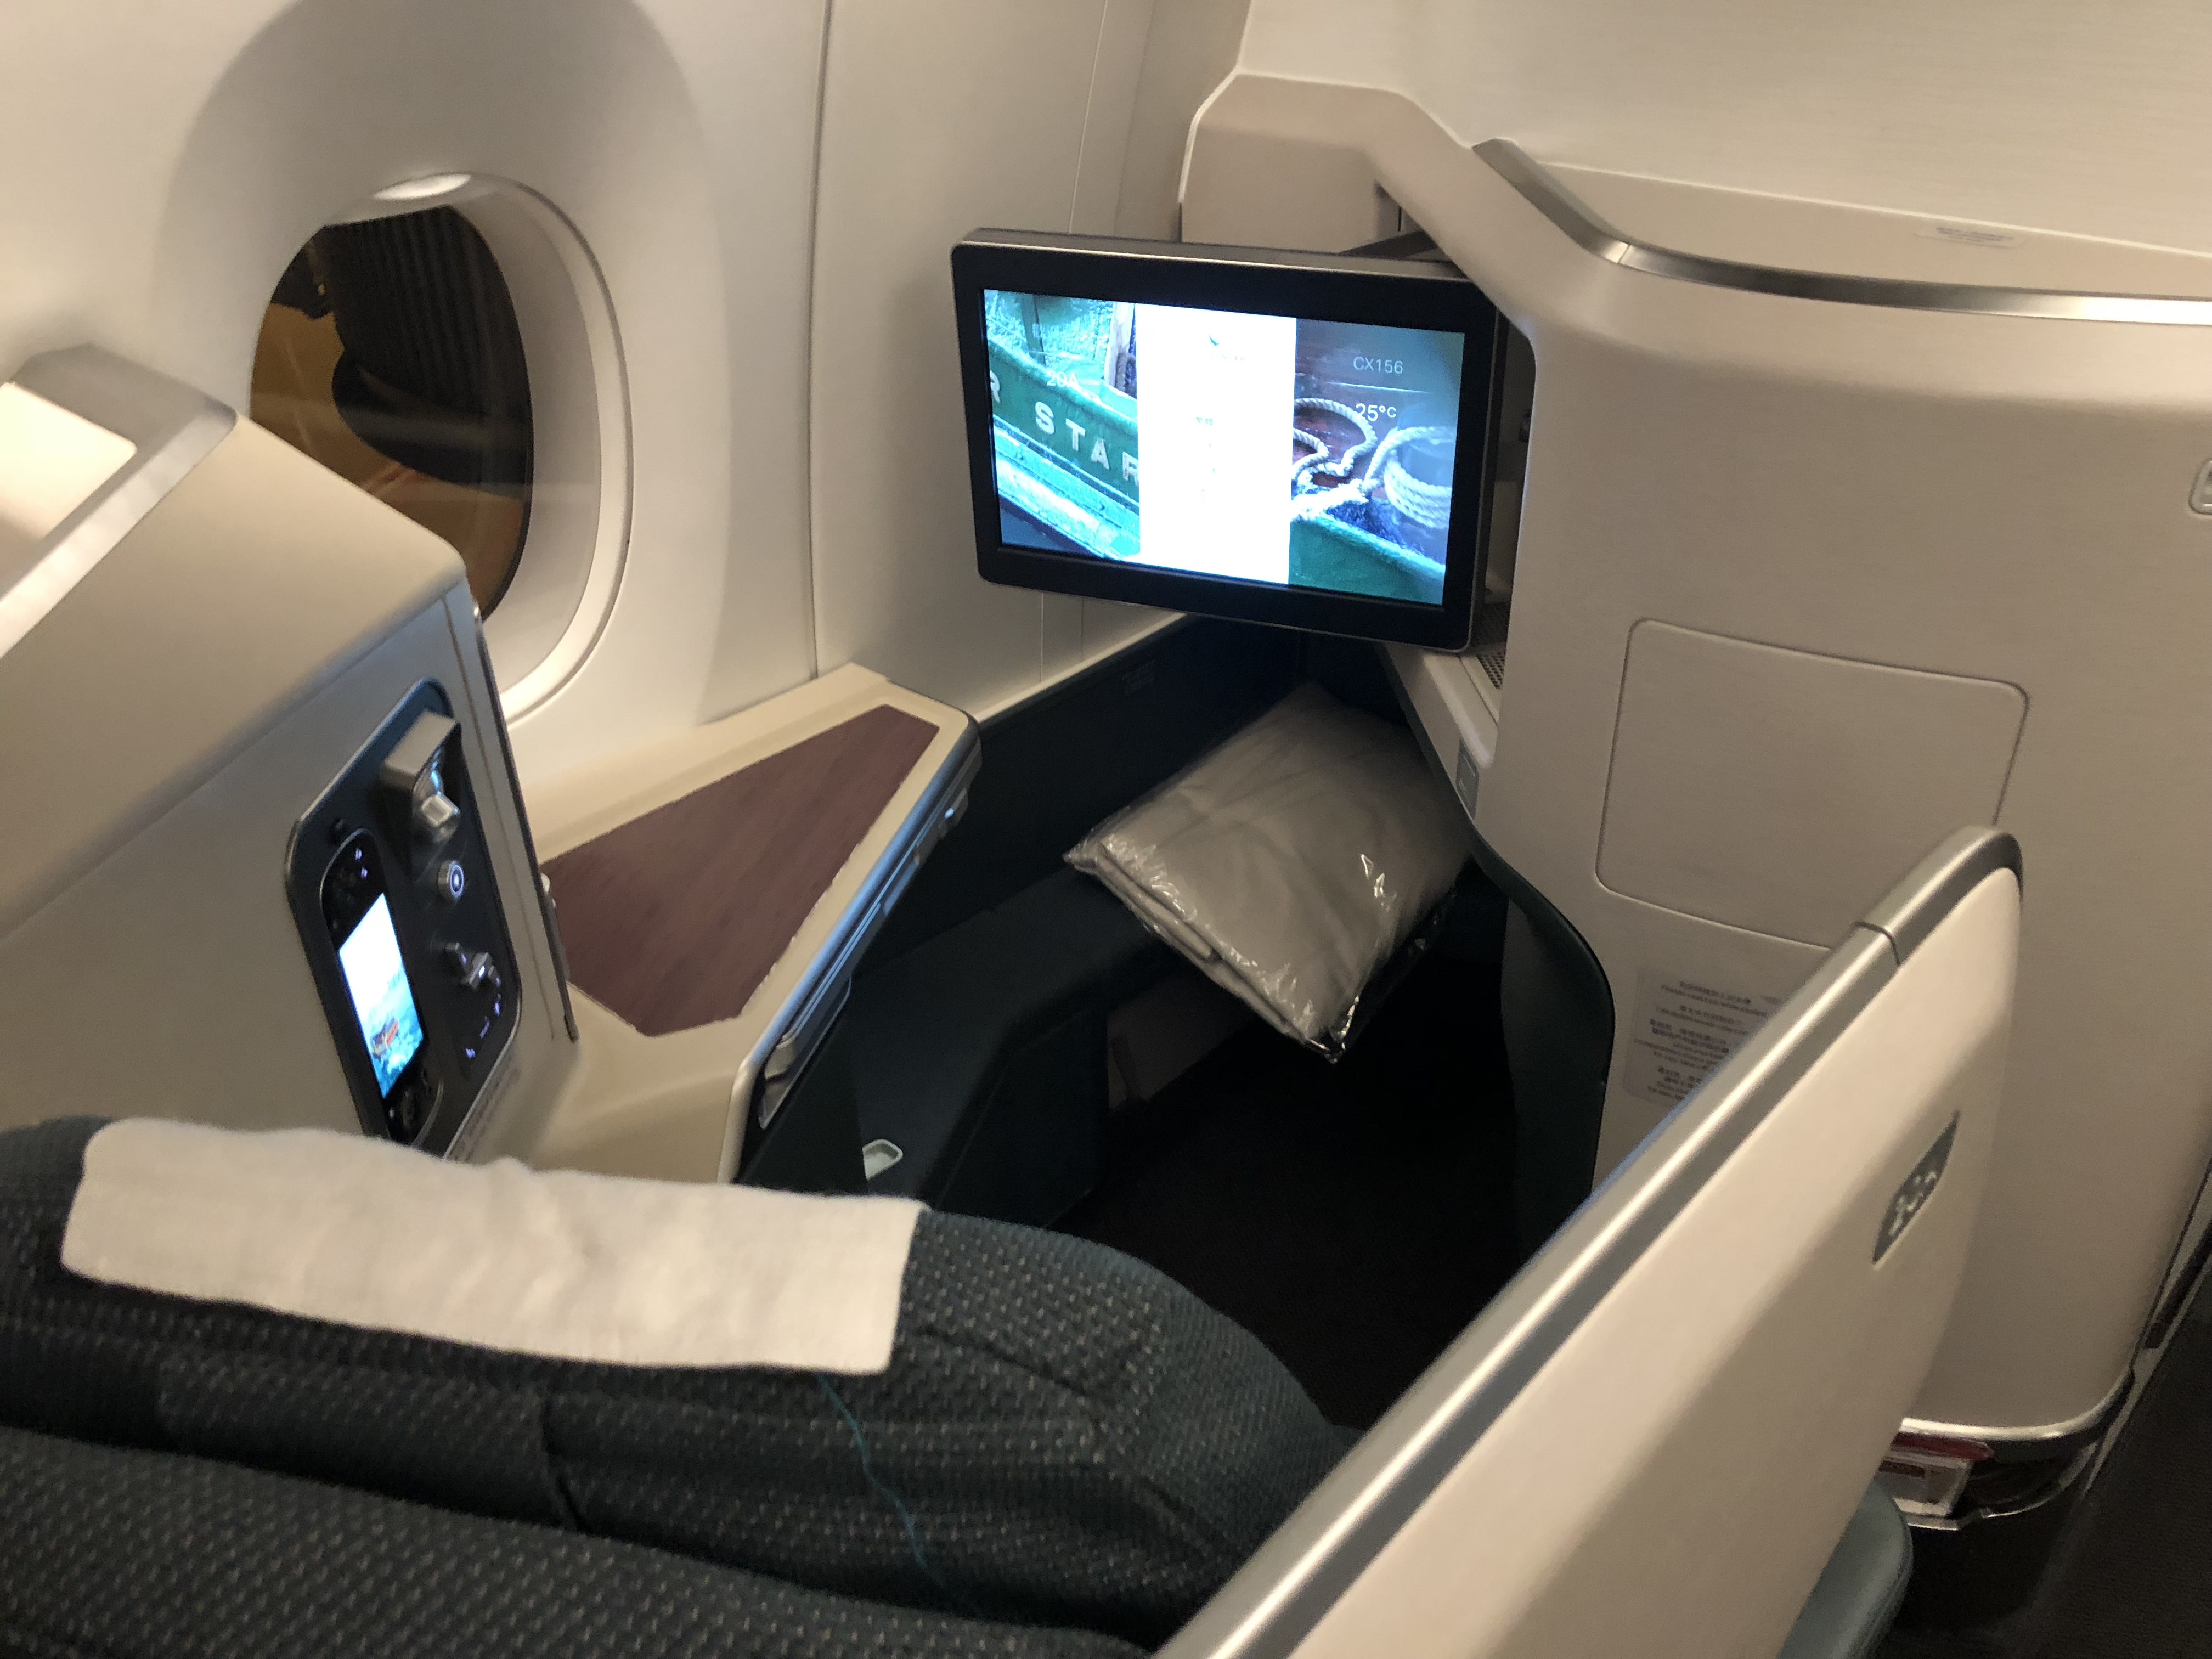 Cathay Pacific Business Class A350 Brisbane to Hong Kong